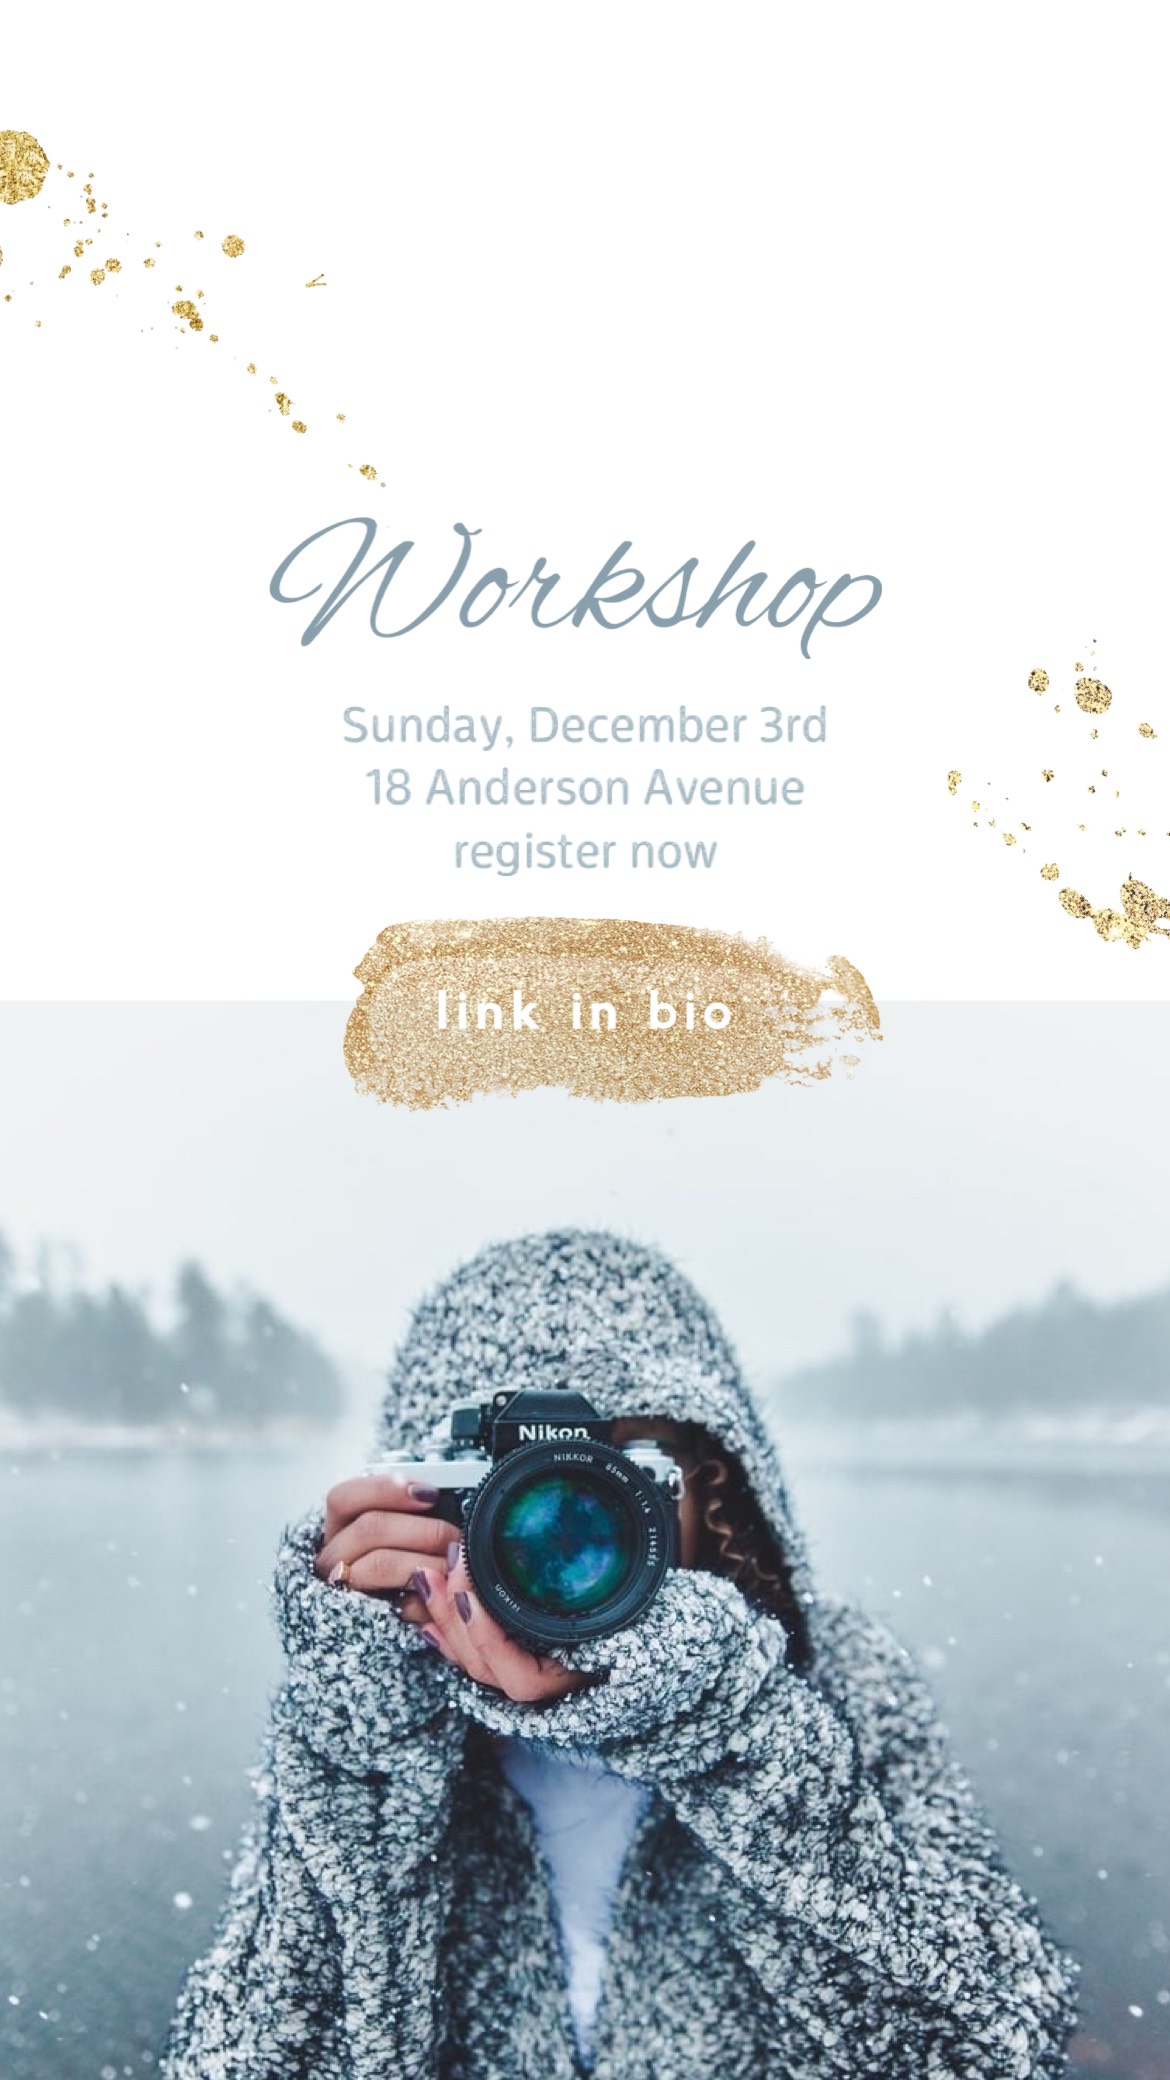 Woman taking a picture in the snow "sign up for the workshop" Winter Story template